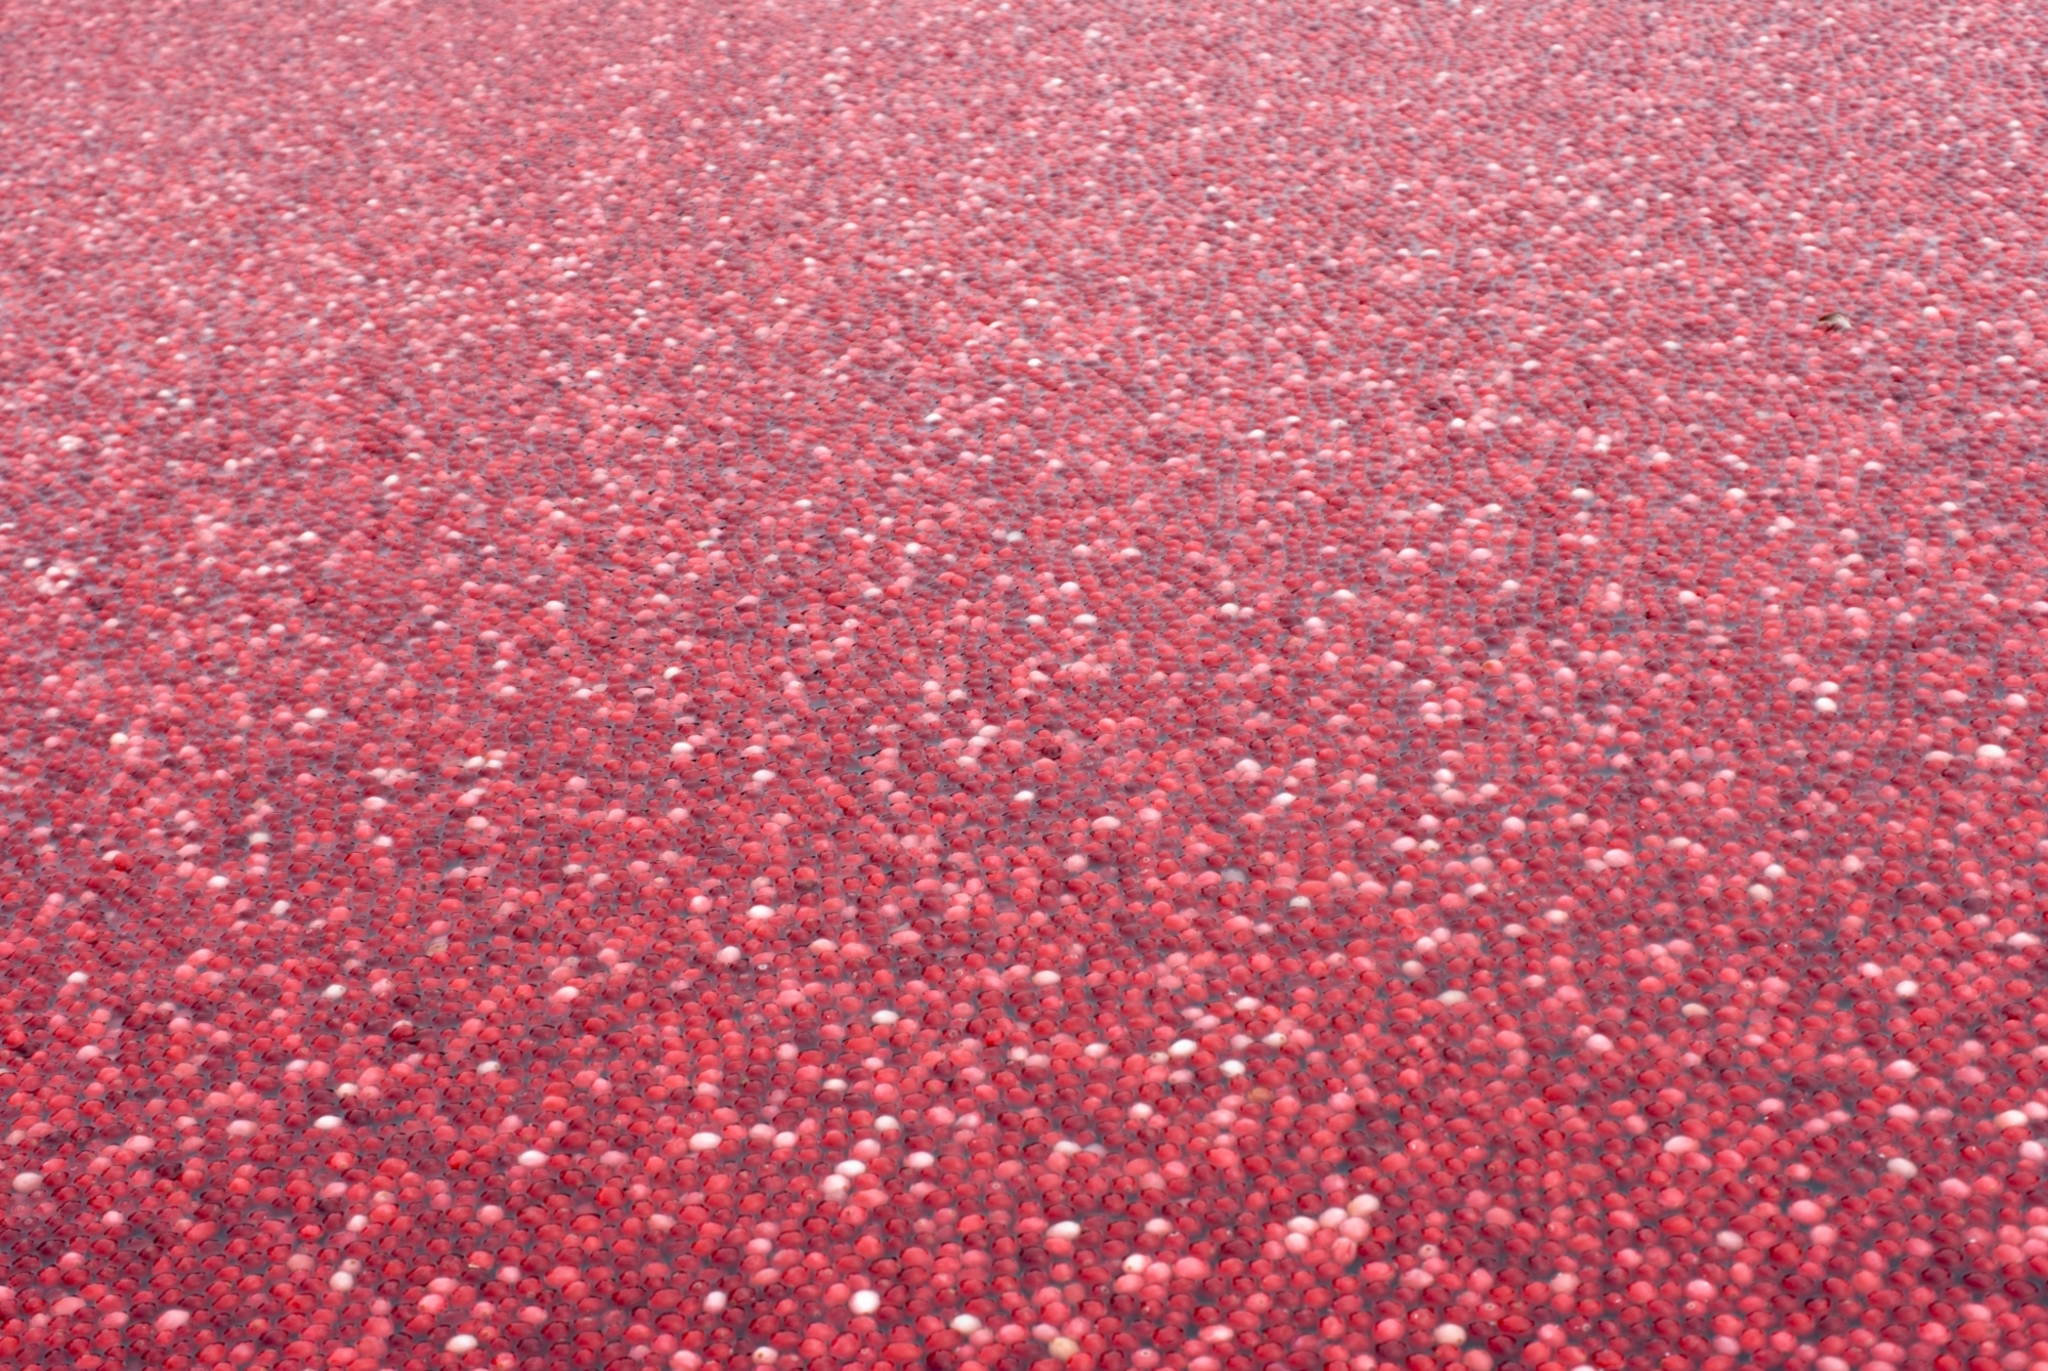 Thousands of red cranberries floating on the surface of water